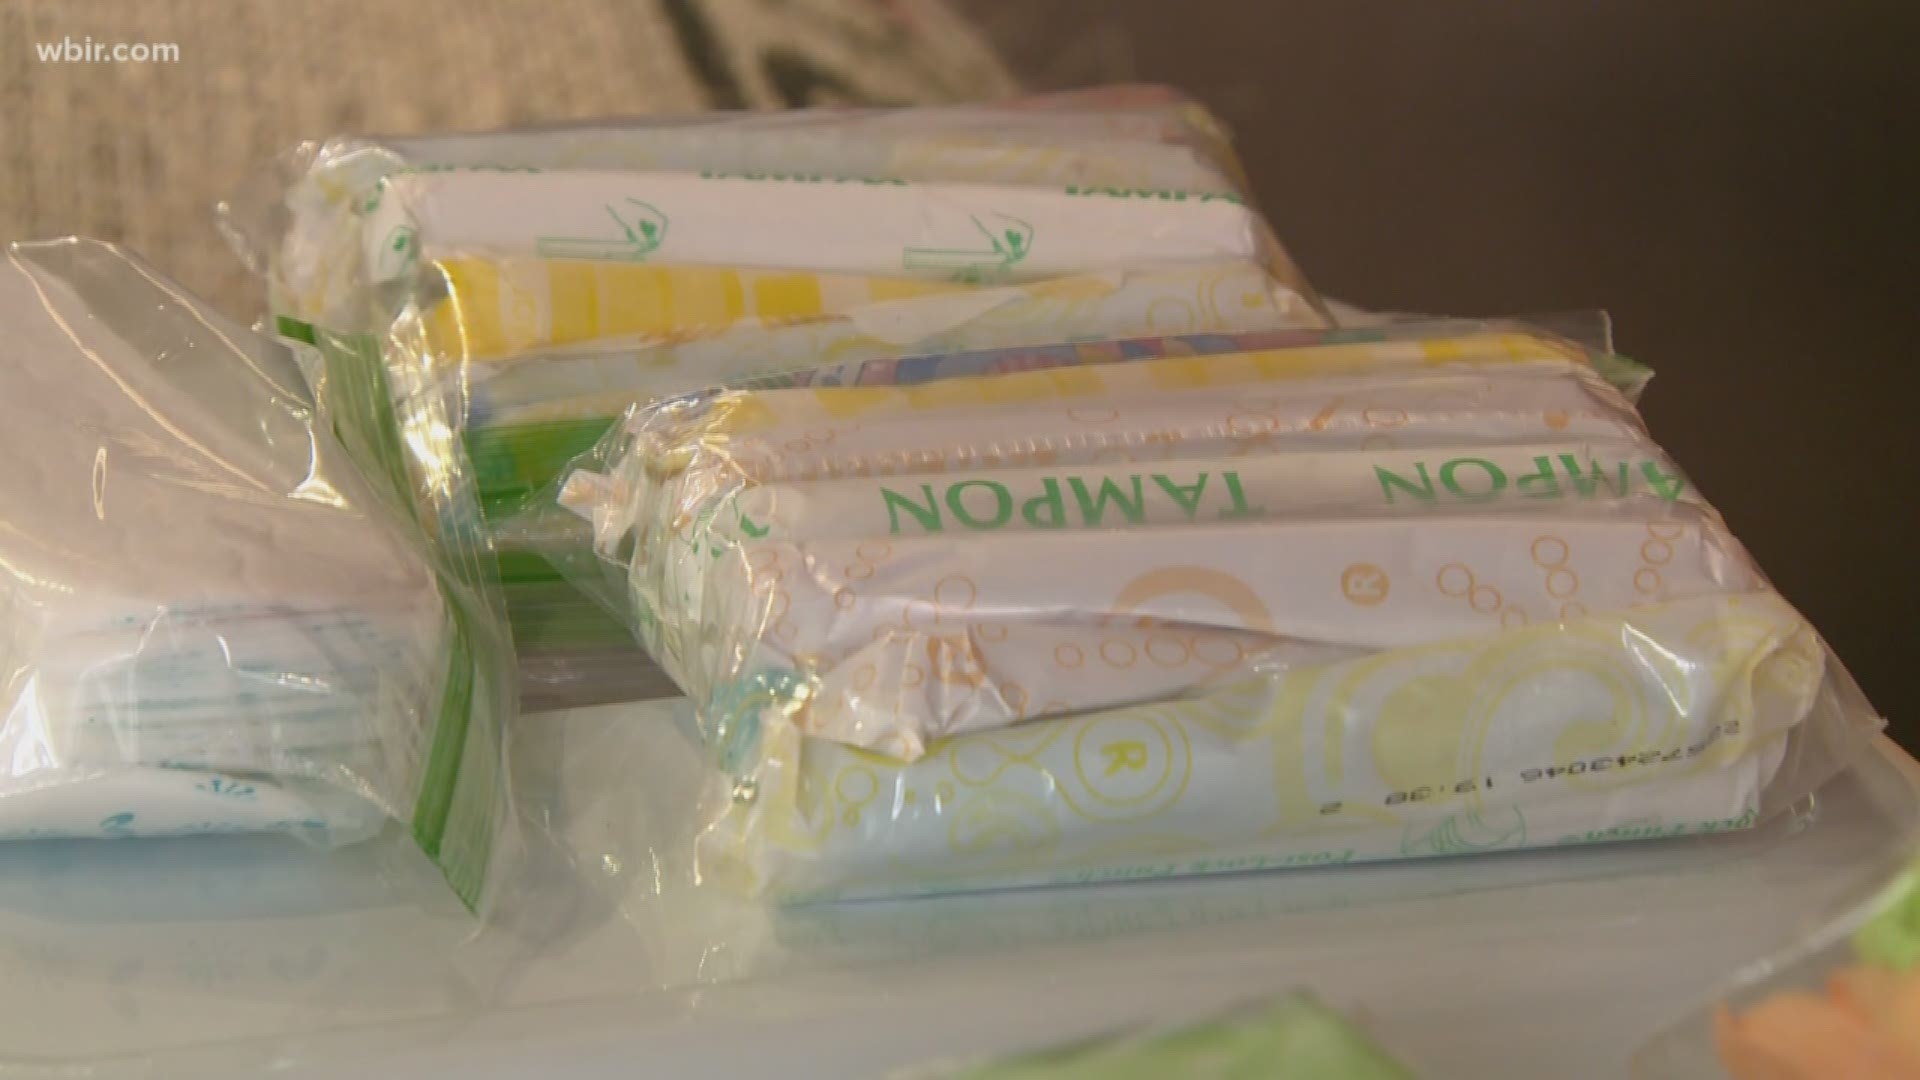 On July 1st schools across the state will get a chance to make feminine hygiene products more accessible to young girls. Back in April the Tennessee House passed a bill allowing some schools to provide free products in all women's bathrooms and locker rooms.